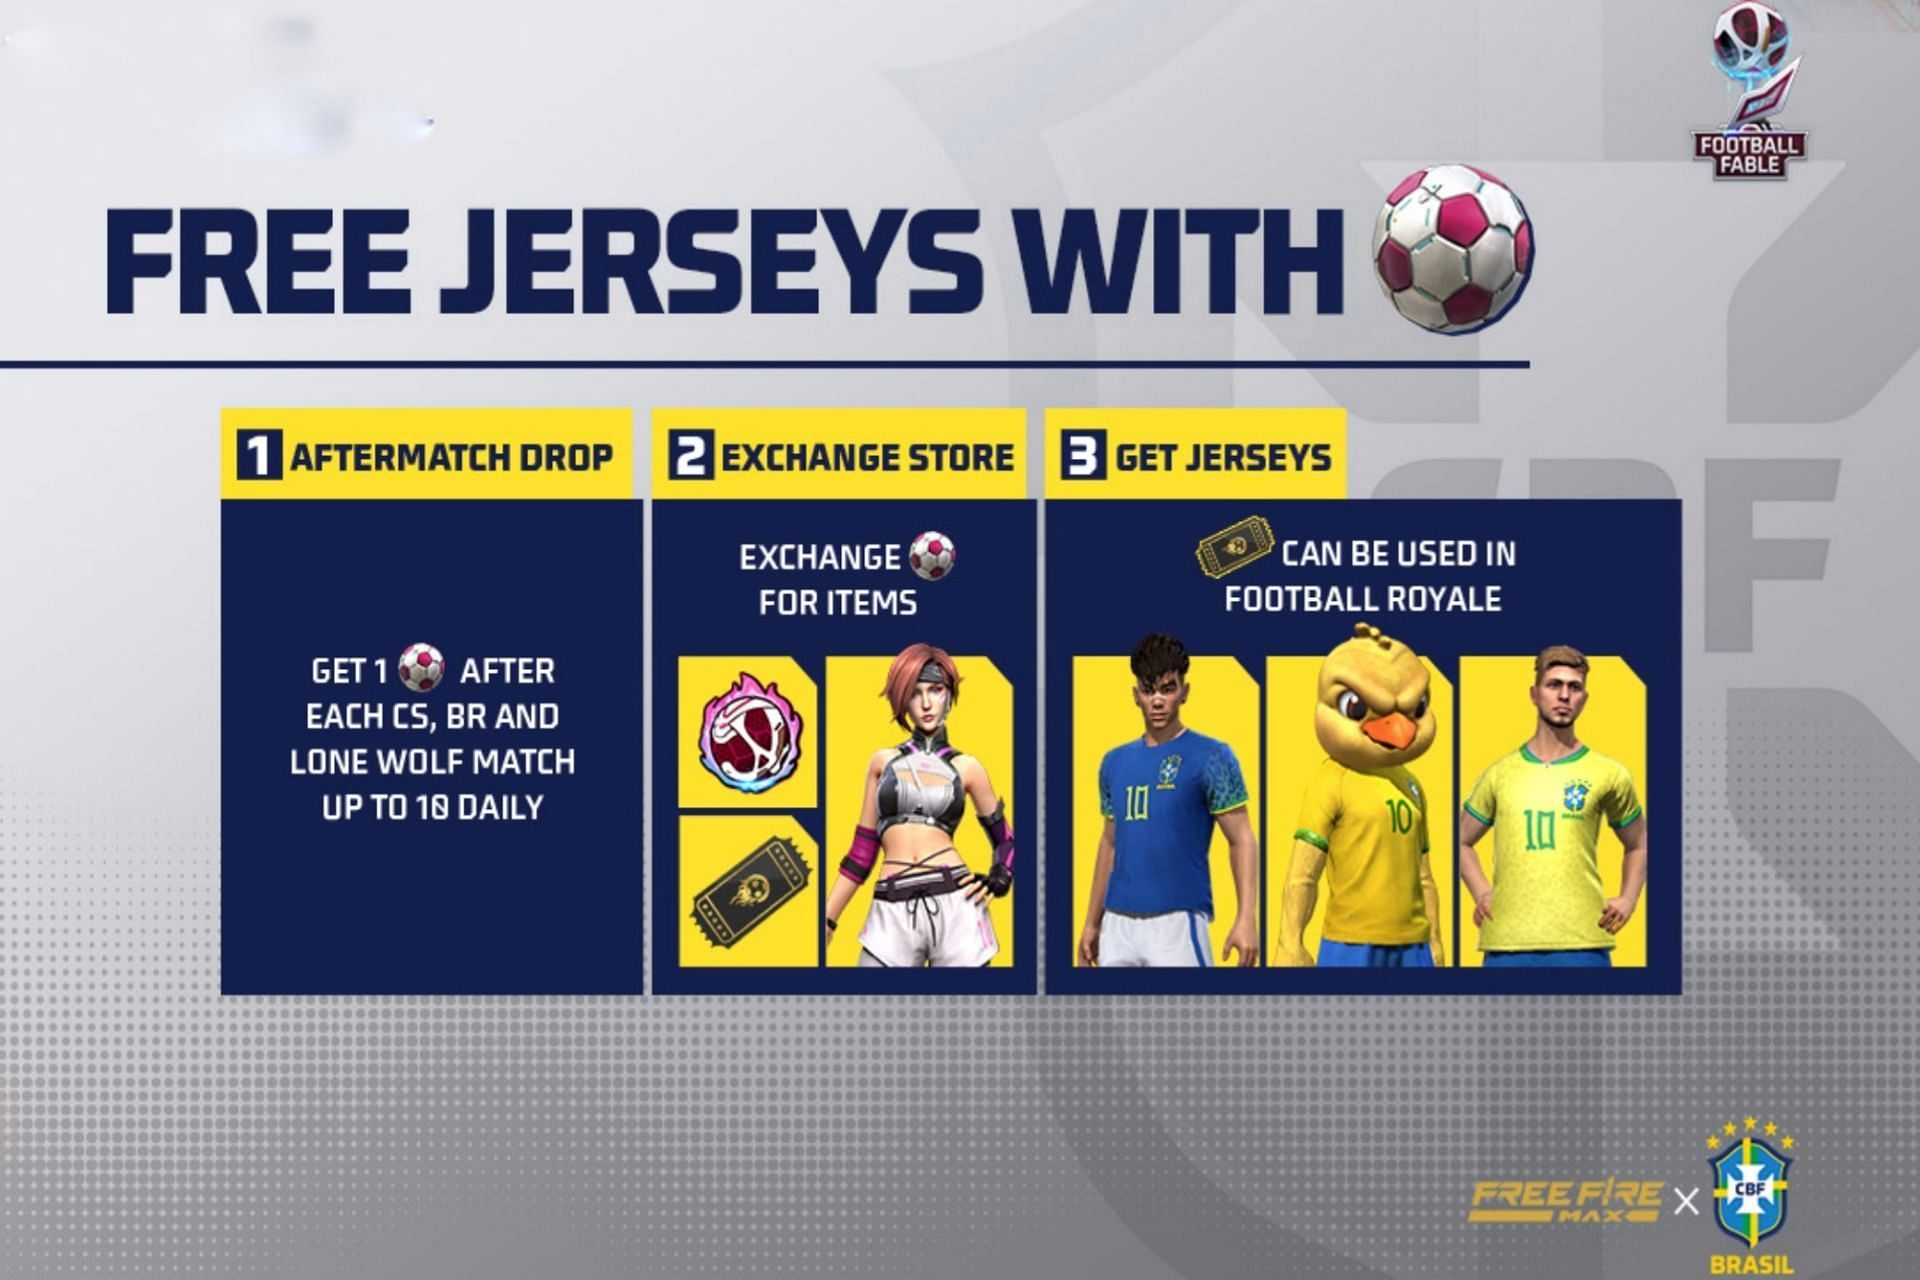 Users stand a chance to get a free jersey (Image via Garena)